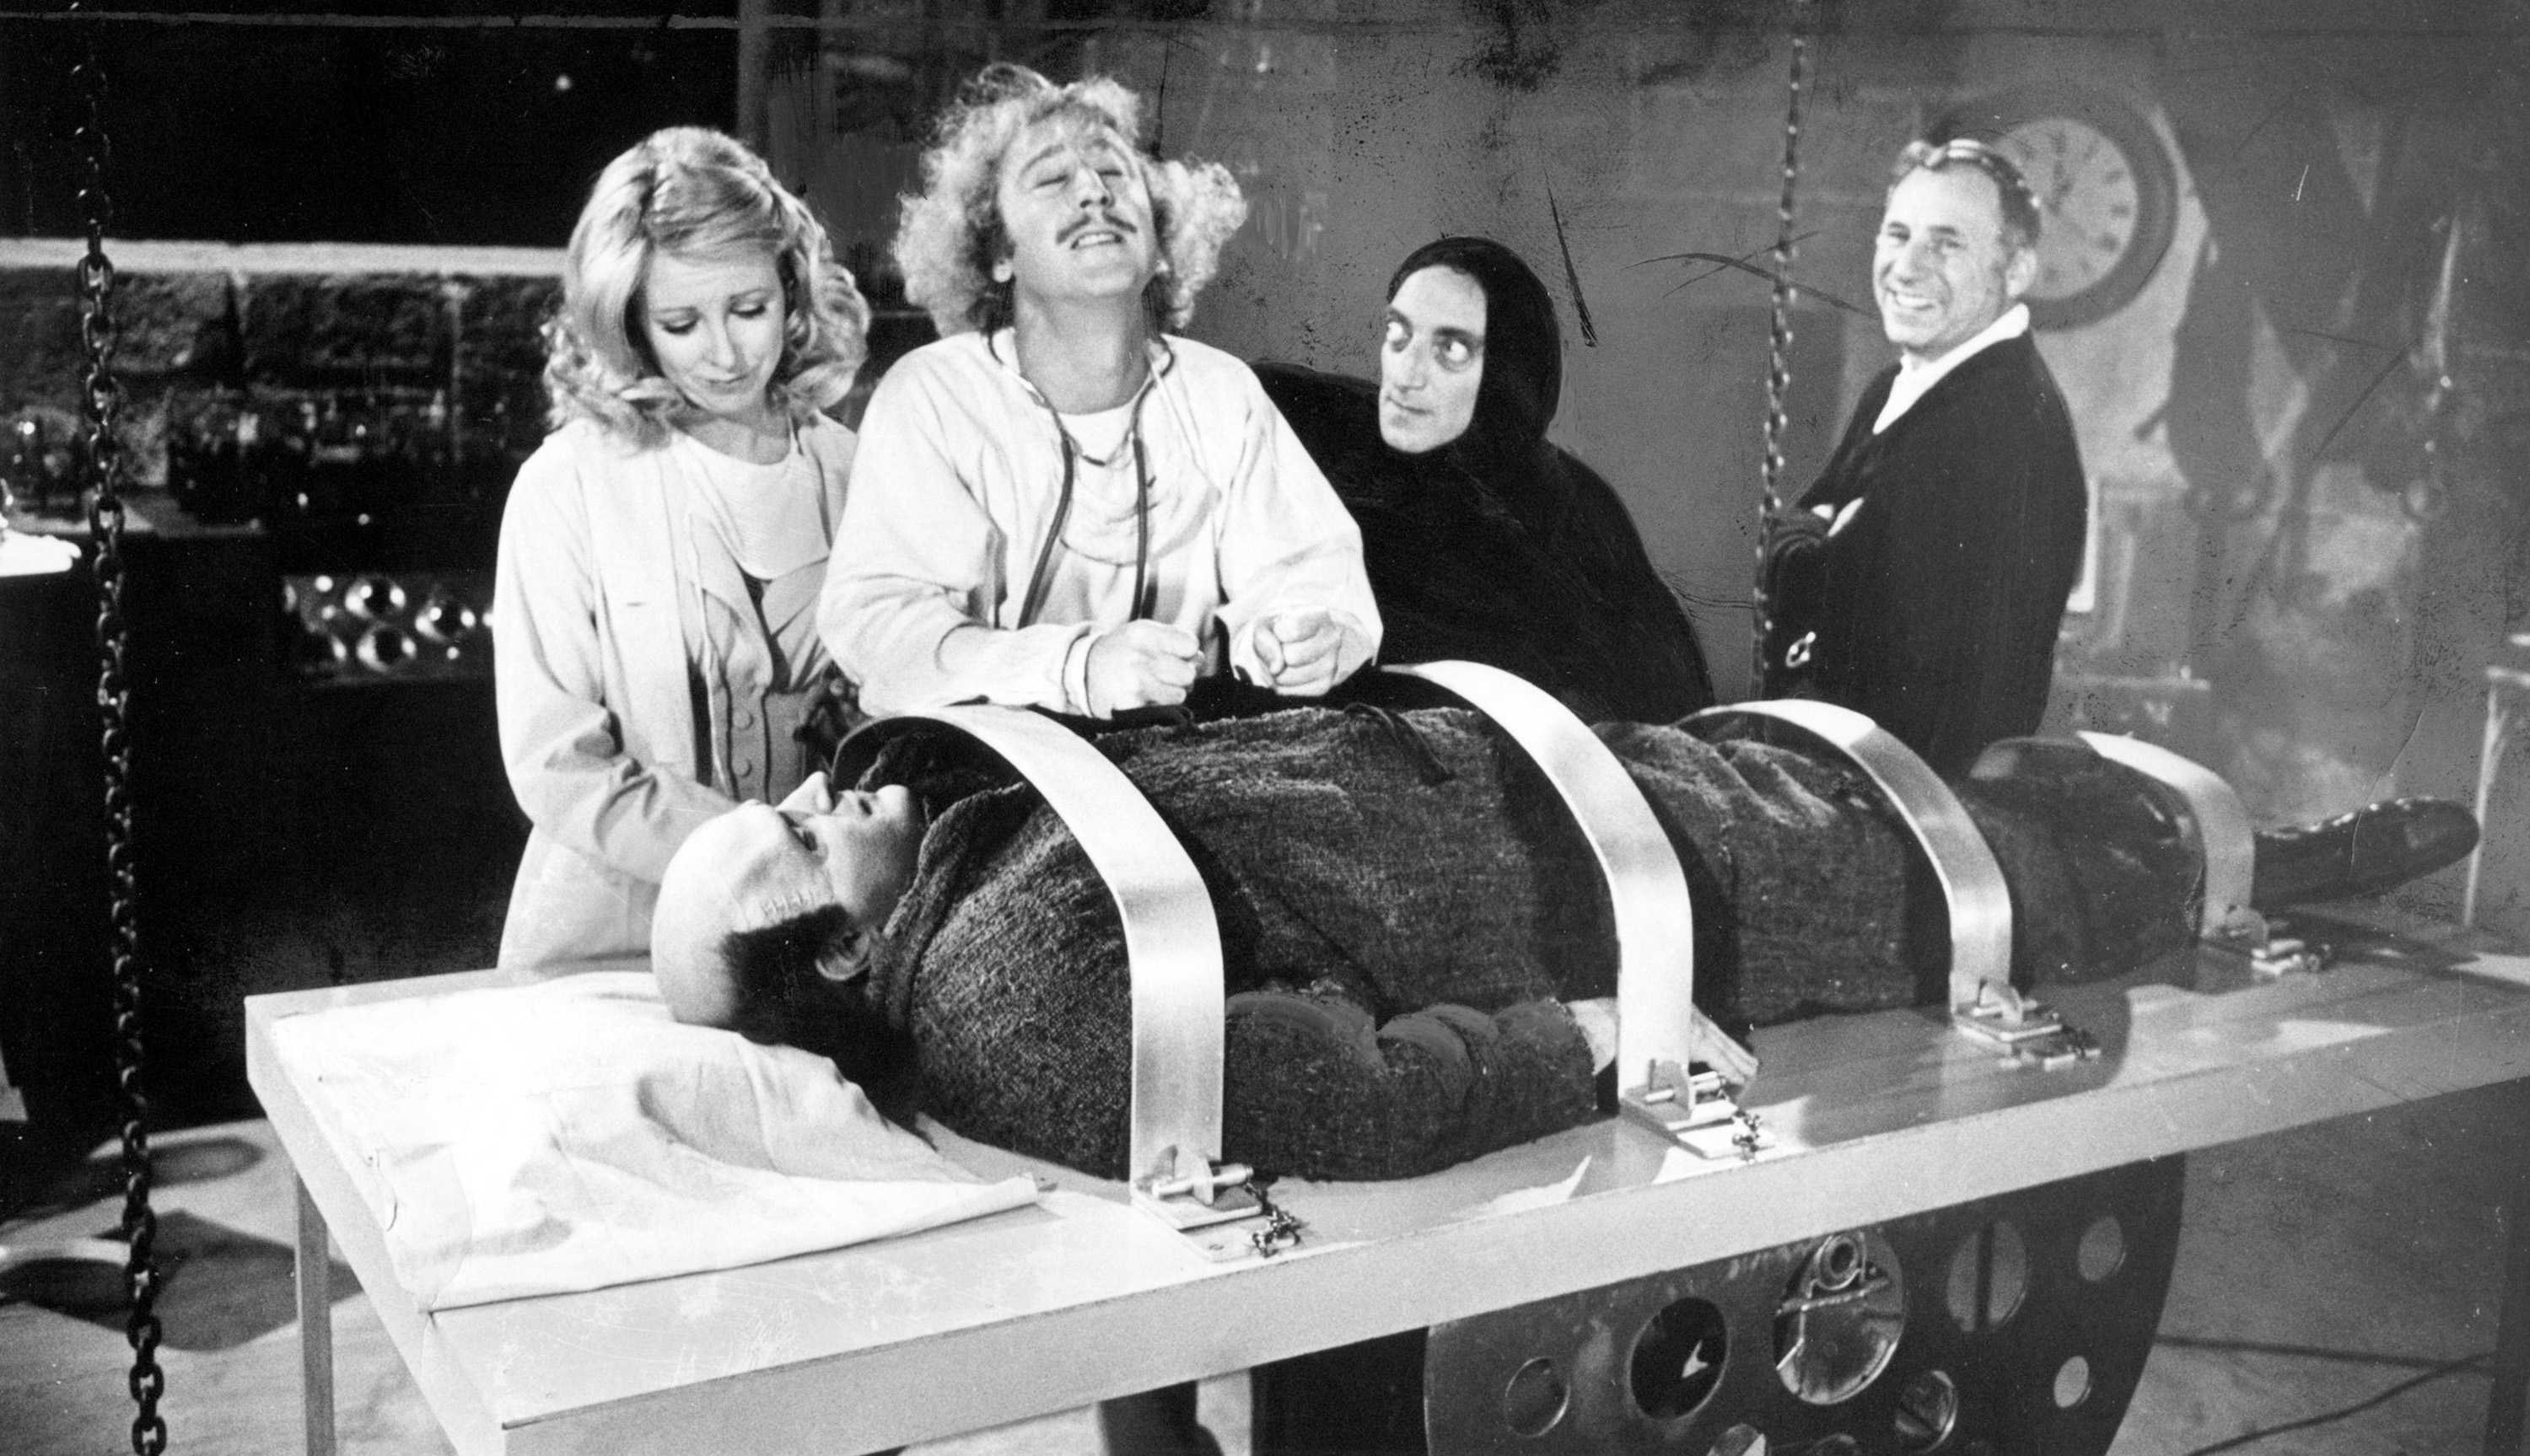 1974 staff file photo from the set of Young Frankenstein. From left: Teri Garr, Gene Wilder, Marty Feldman, Mel Brooks and Peter Boyle as Young Frankenstein. (File Photos/Los Angeles Times/TNS)